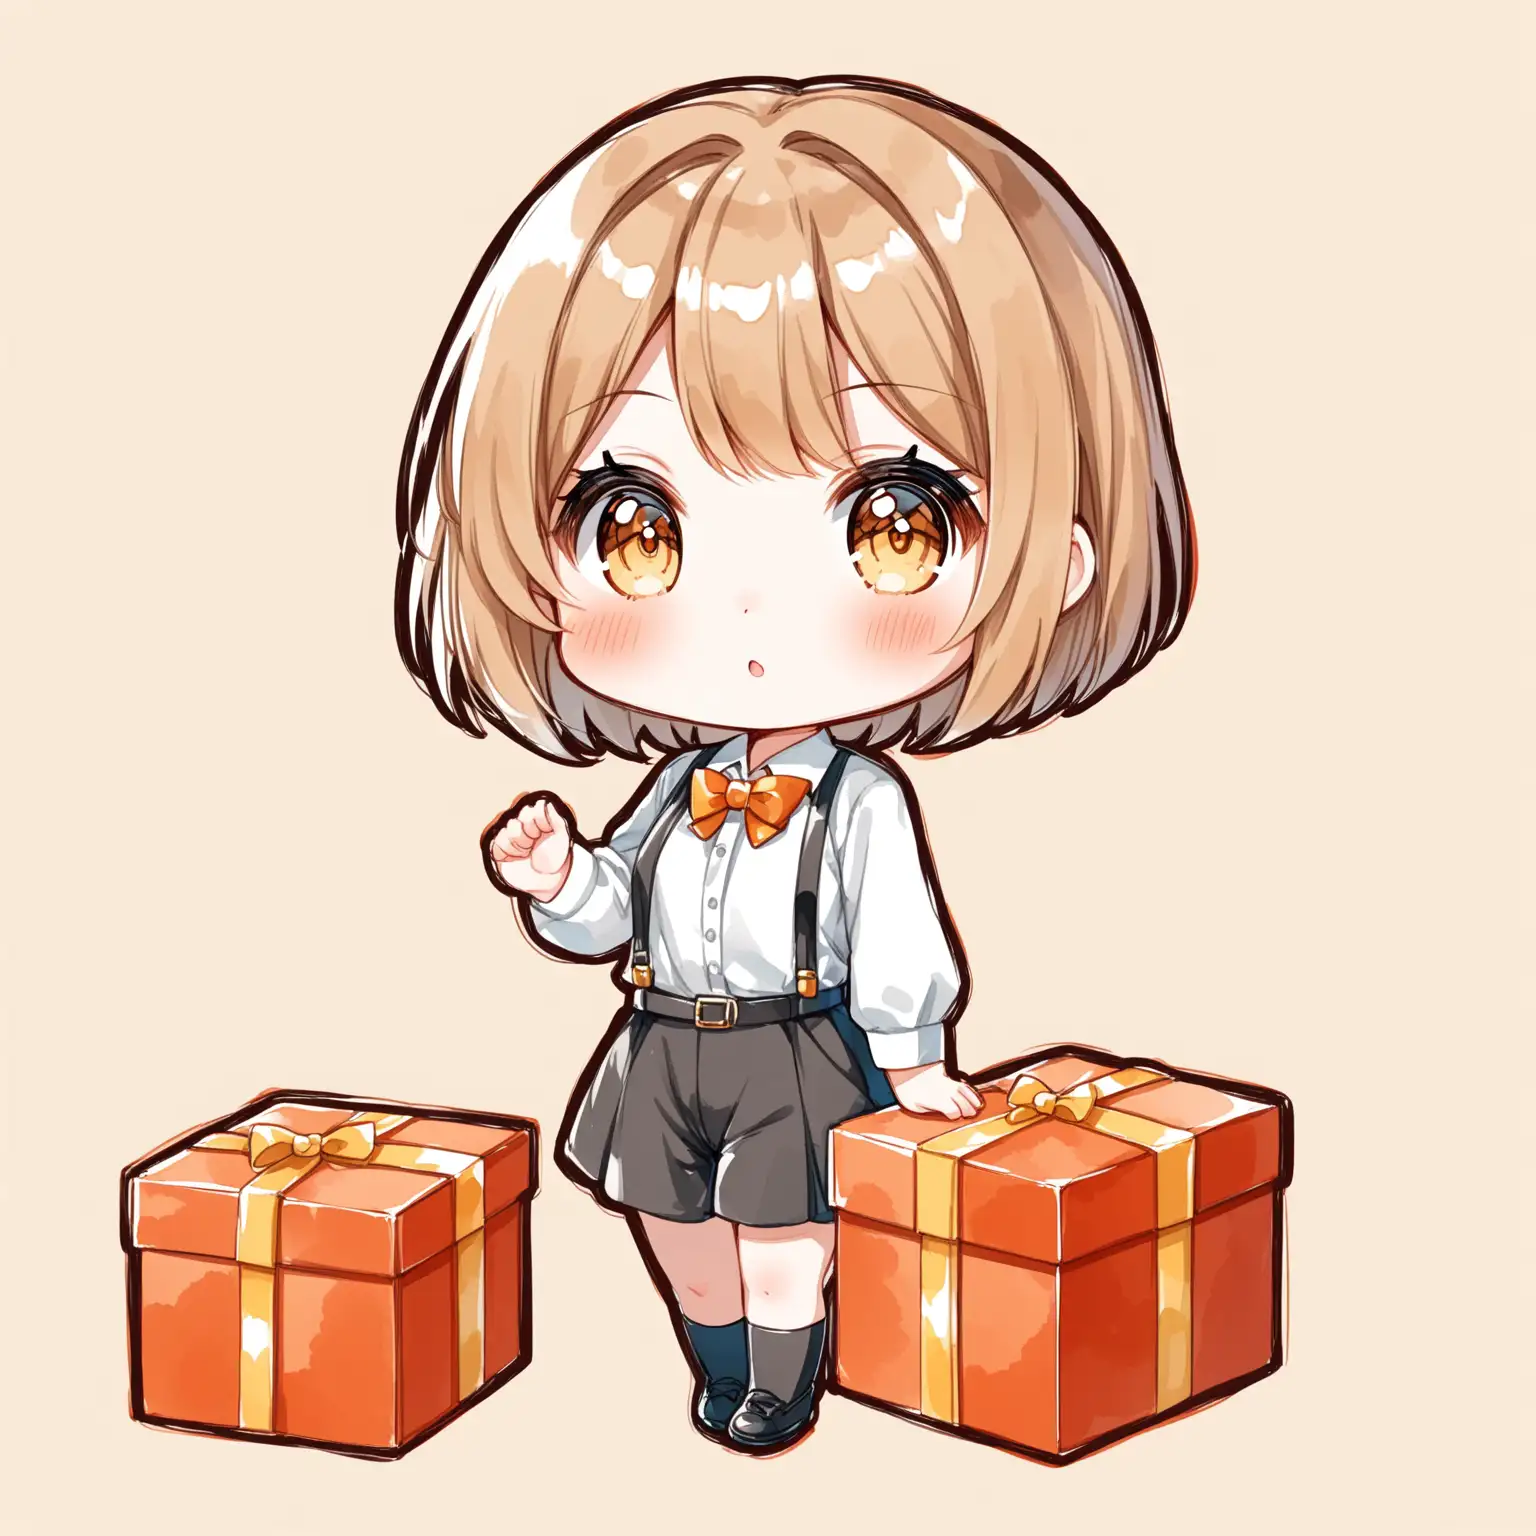 Playful Anime Cute Girl in Chibi Style Costume with Lucky Box